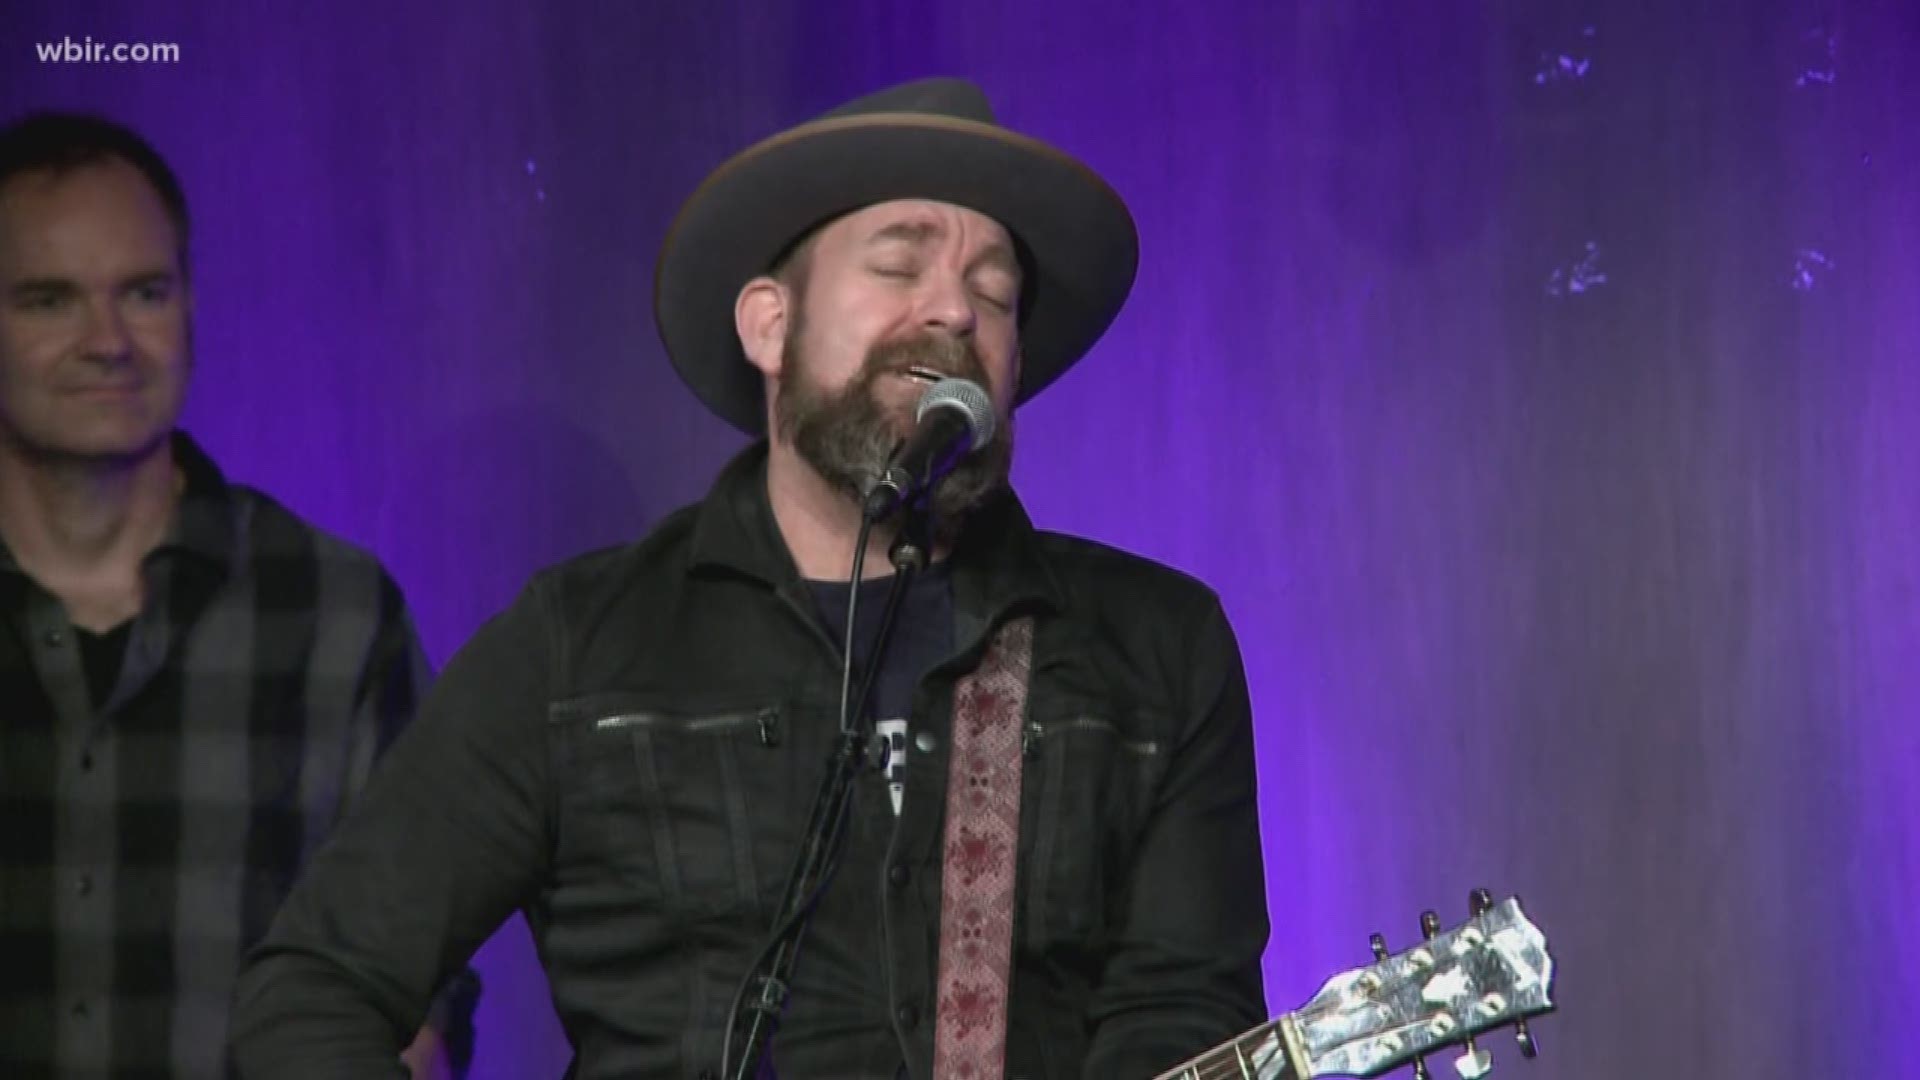 Recently, the East Tennessee native played to a hometown crowd. 10News Anchor Beth Haynes caught up with the Grammy winning, multiplatinum-selling singer and songwriter.